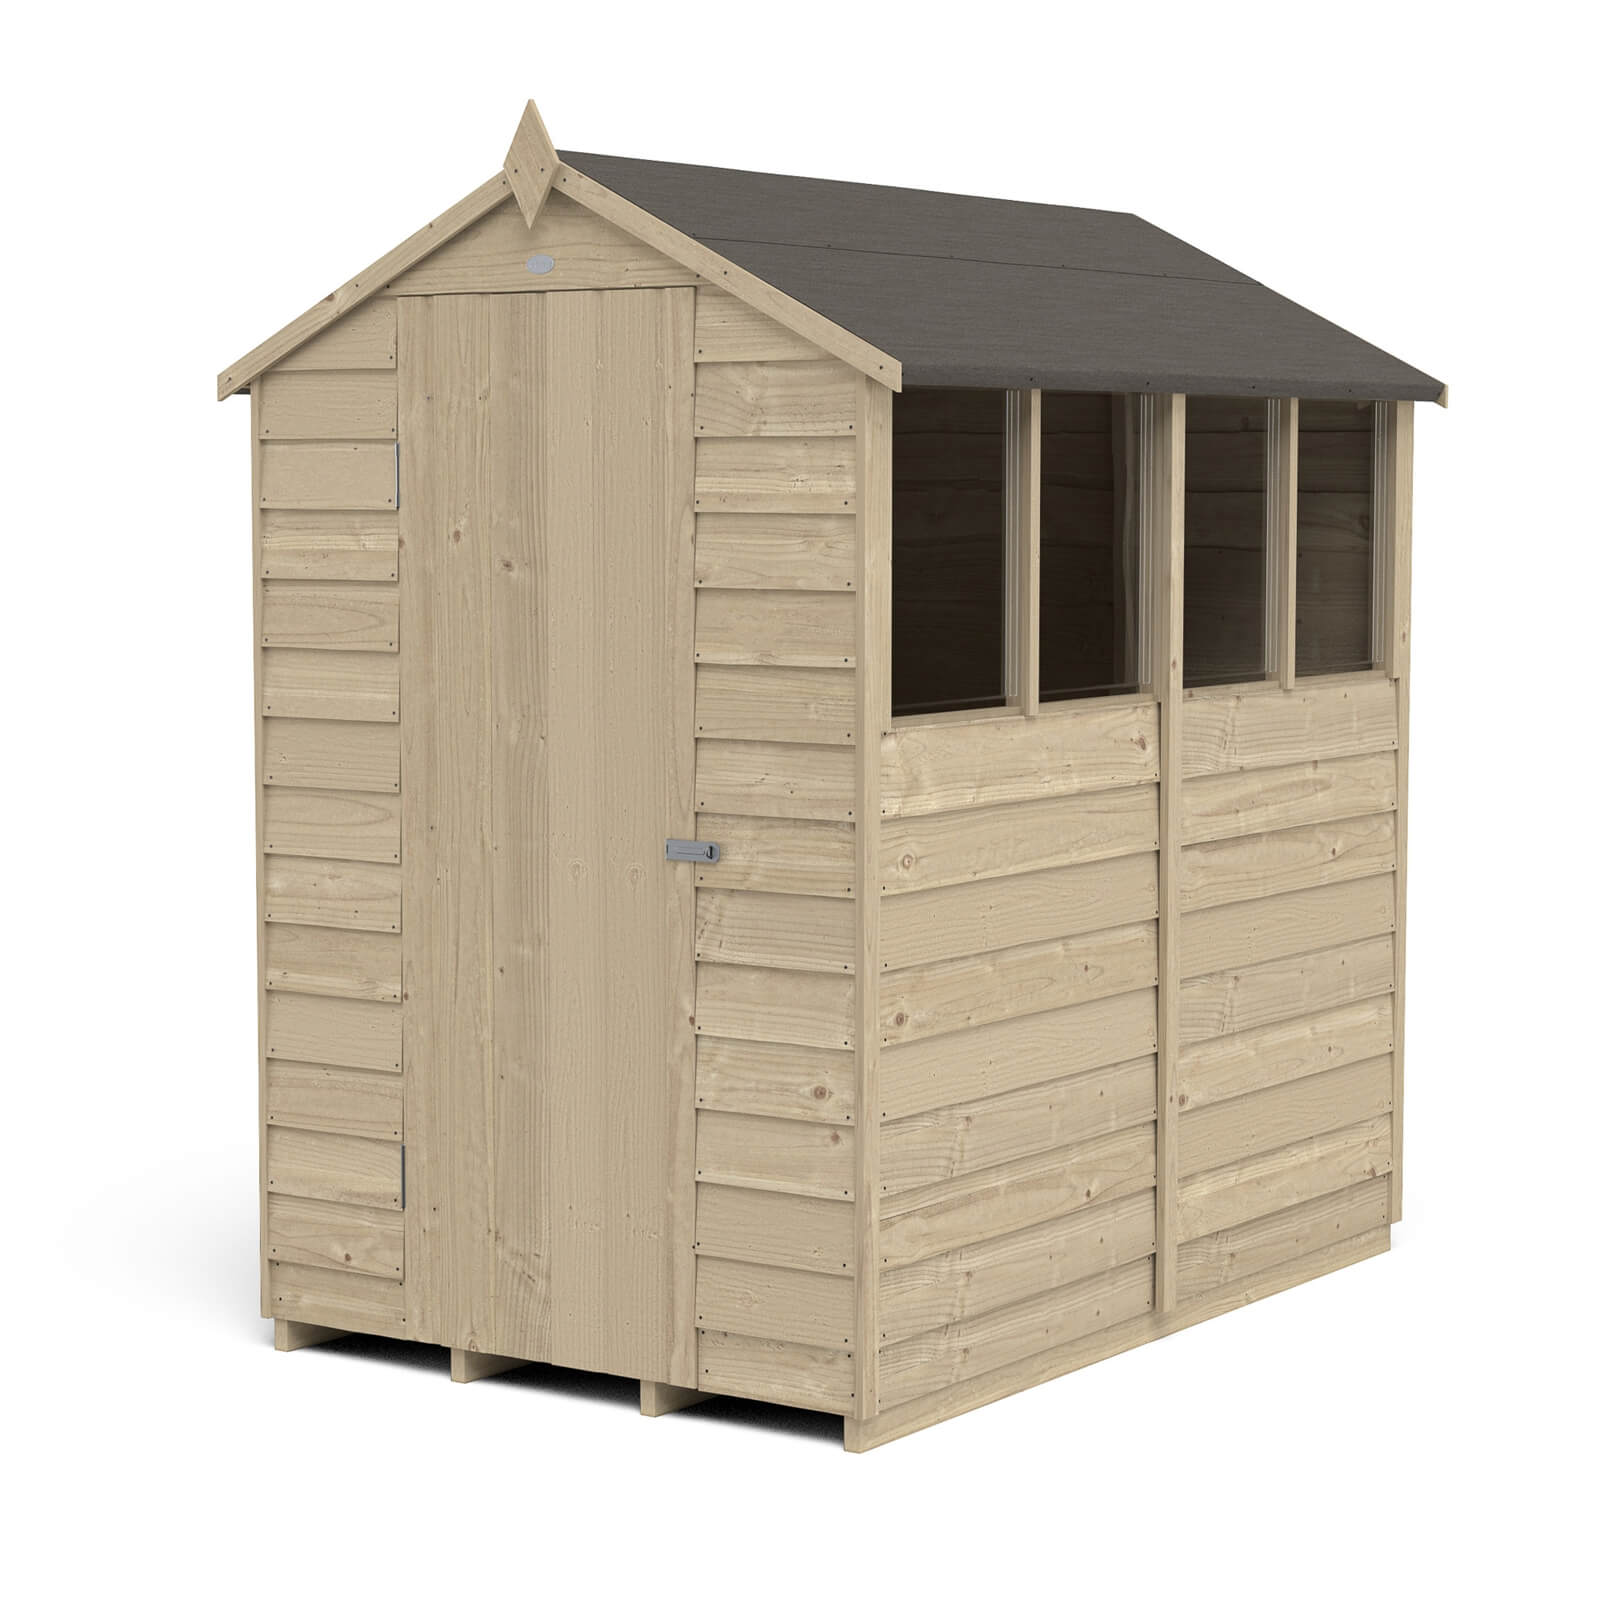 Forest 6 x 4ft Overlap Pressure Treated Apex Shed- 4 Window- incl. Installation